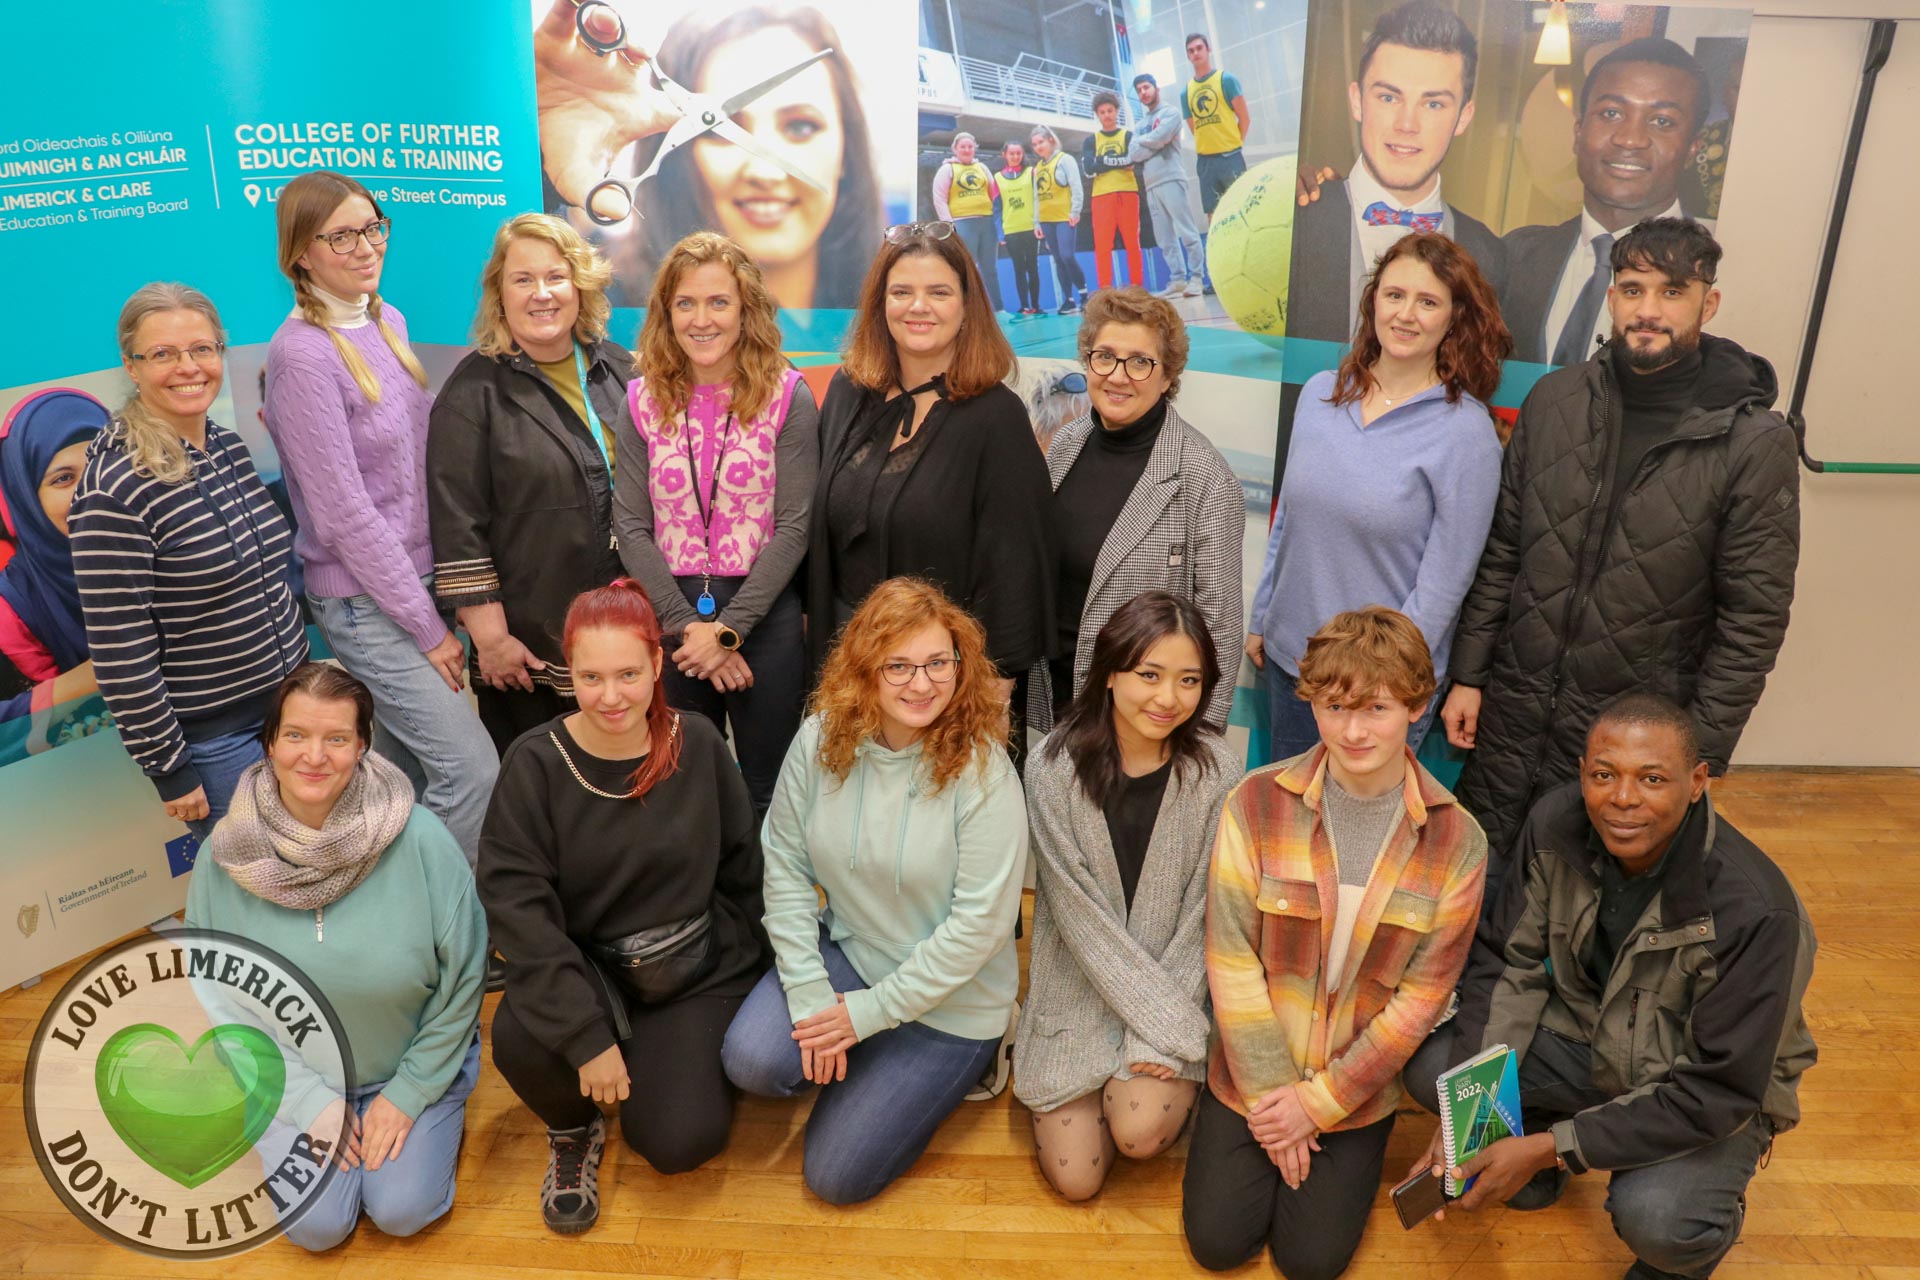 College of FET, LCFE Mulgrave Street Campus celebrates College Awareness Week 2022